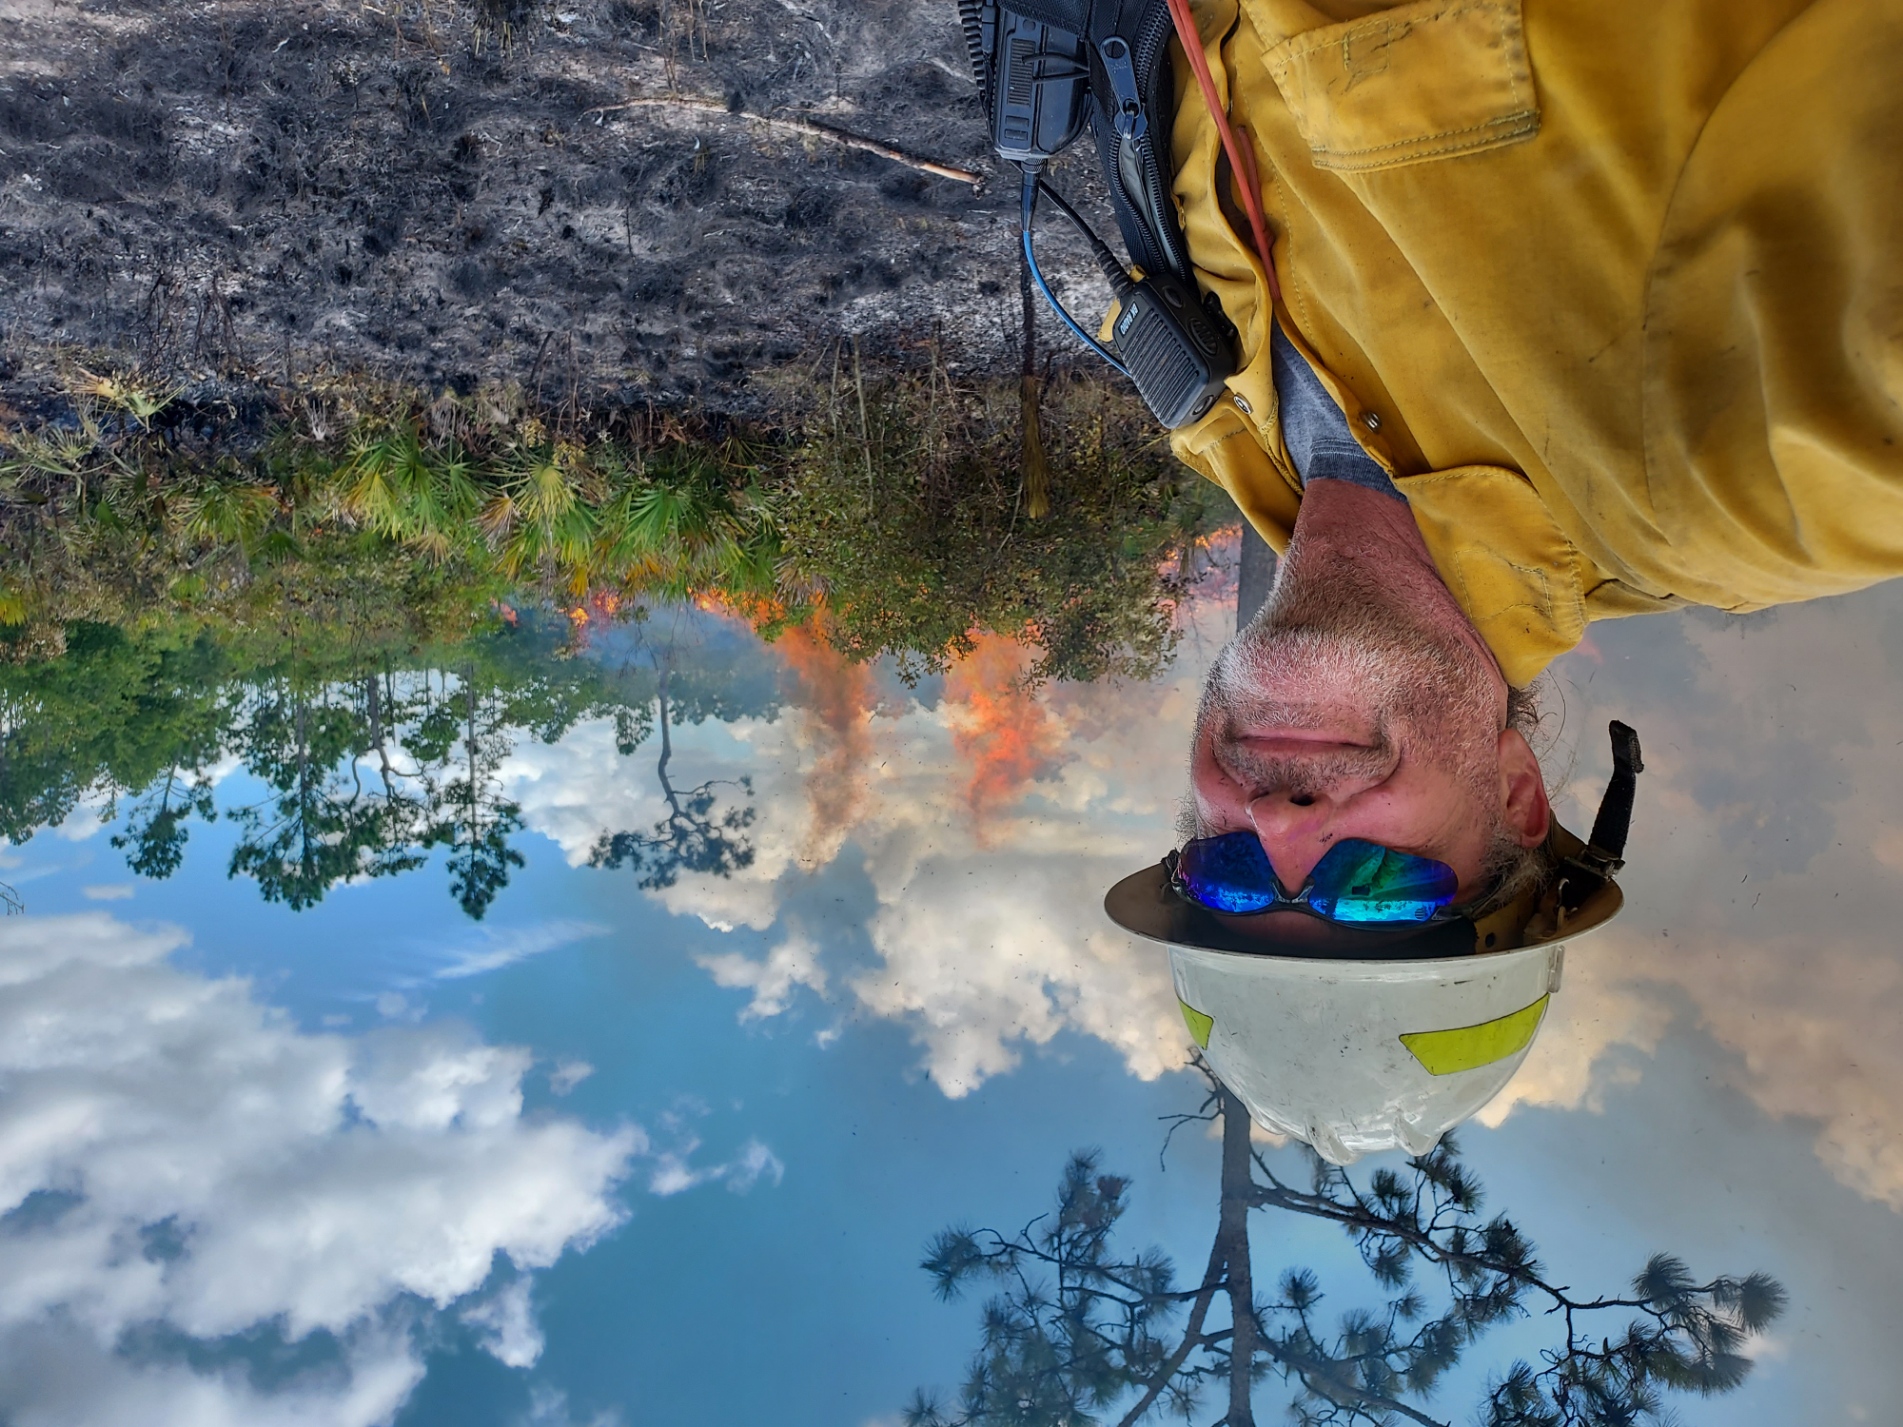 Florida fire program director David Printiss stands against a controlled burn in a forest at Apalachicola Bluffs and Ravines Preserve. 